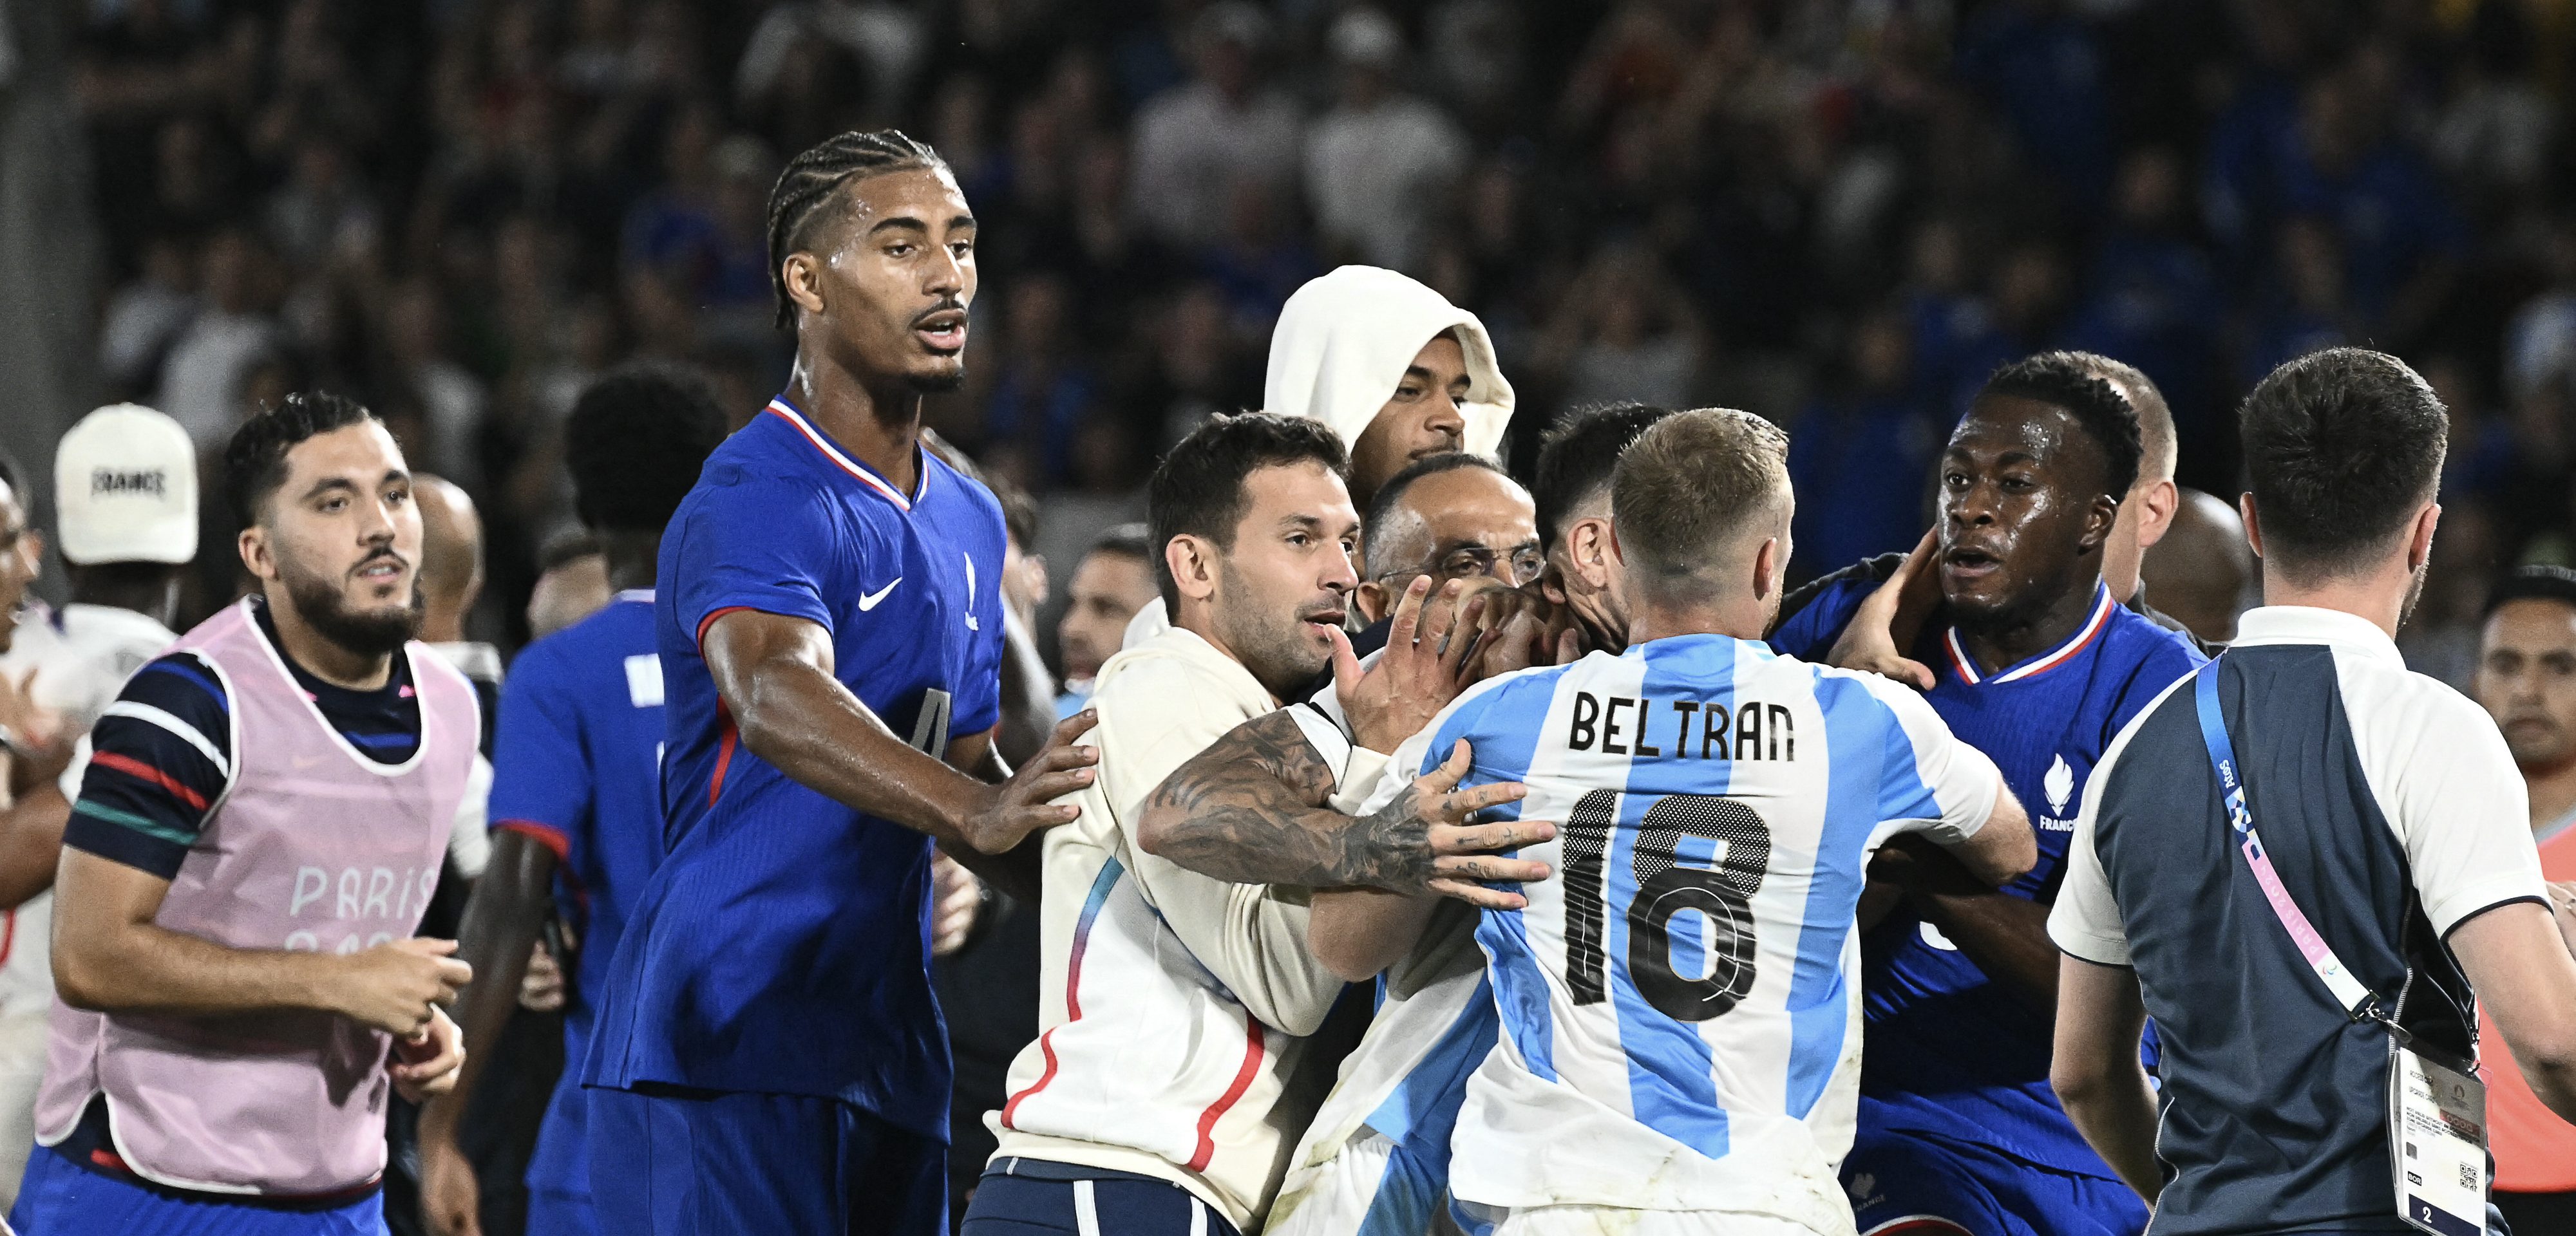 Fight erupts after France eliminates Argentina in 2024 Olympics